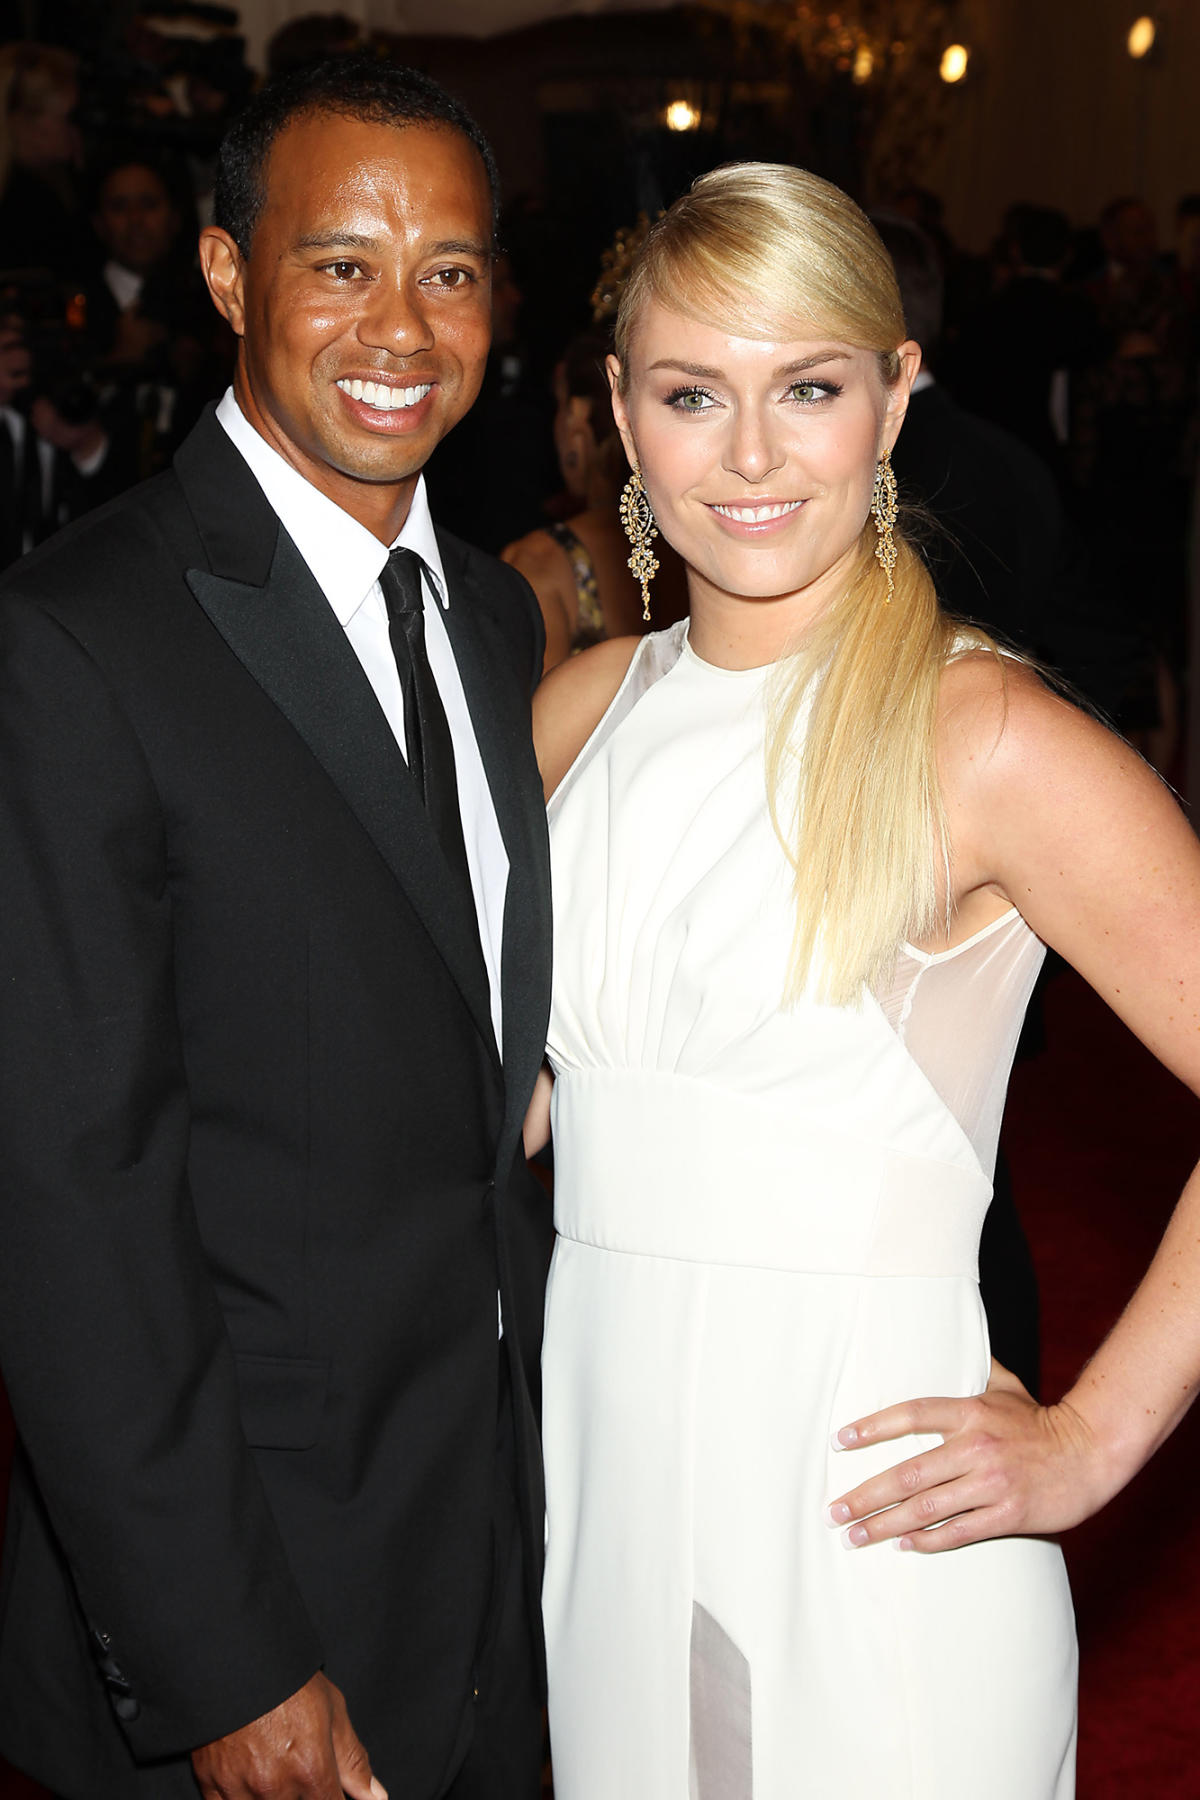 Tiger Woods Dating History The Golfers Marriage, Mistresses, Girlfriends and More pic image